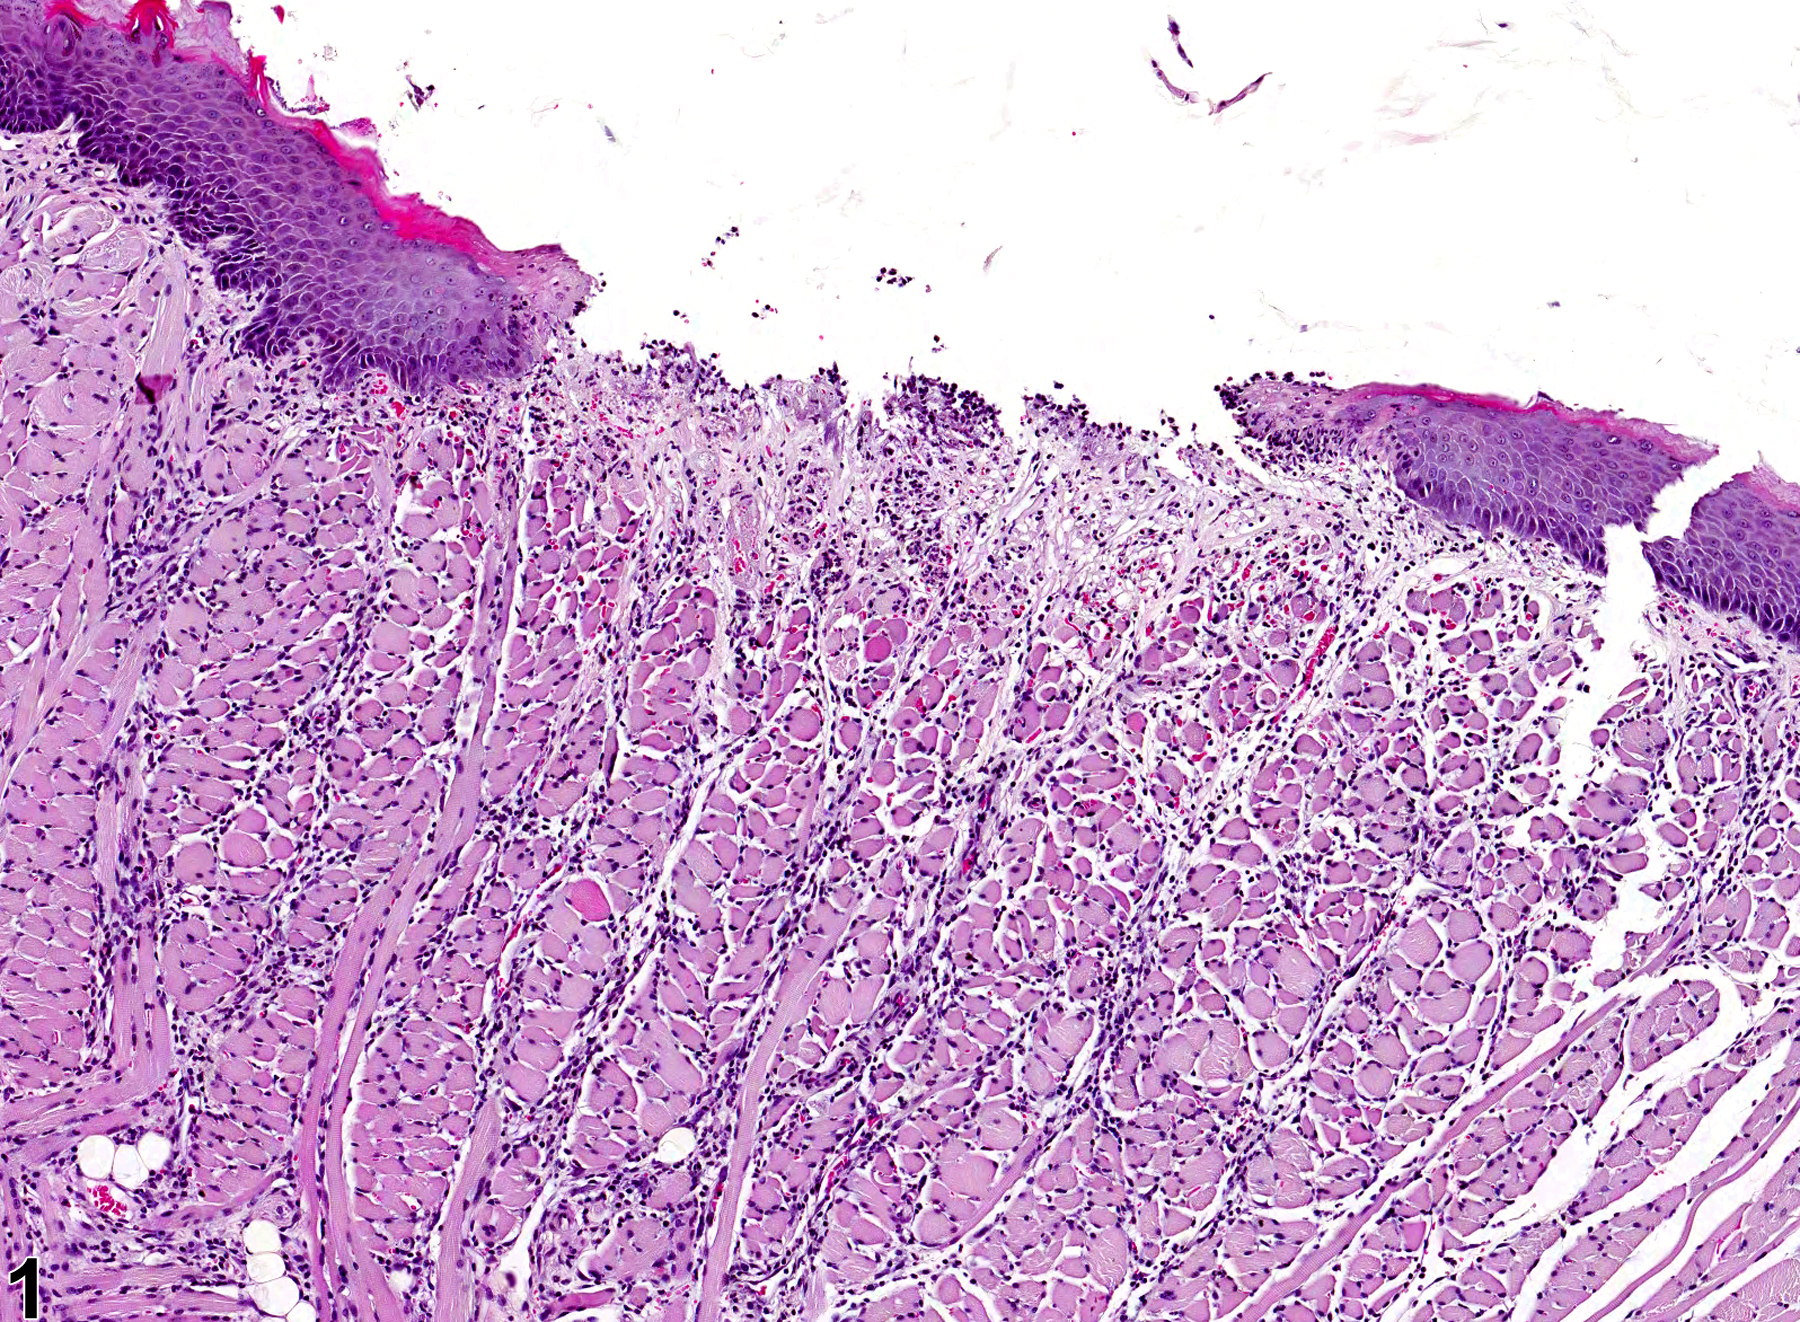 Image of ulcer in the tongue from a female F344/N rat in a chronic study